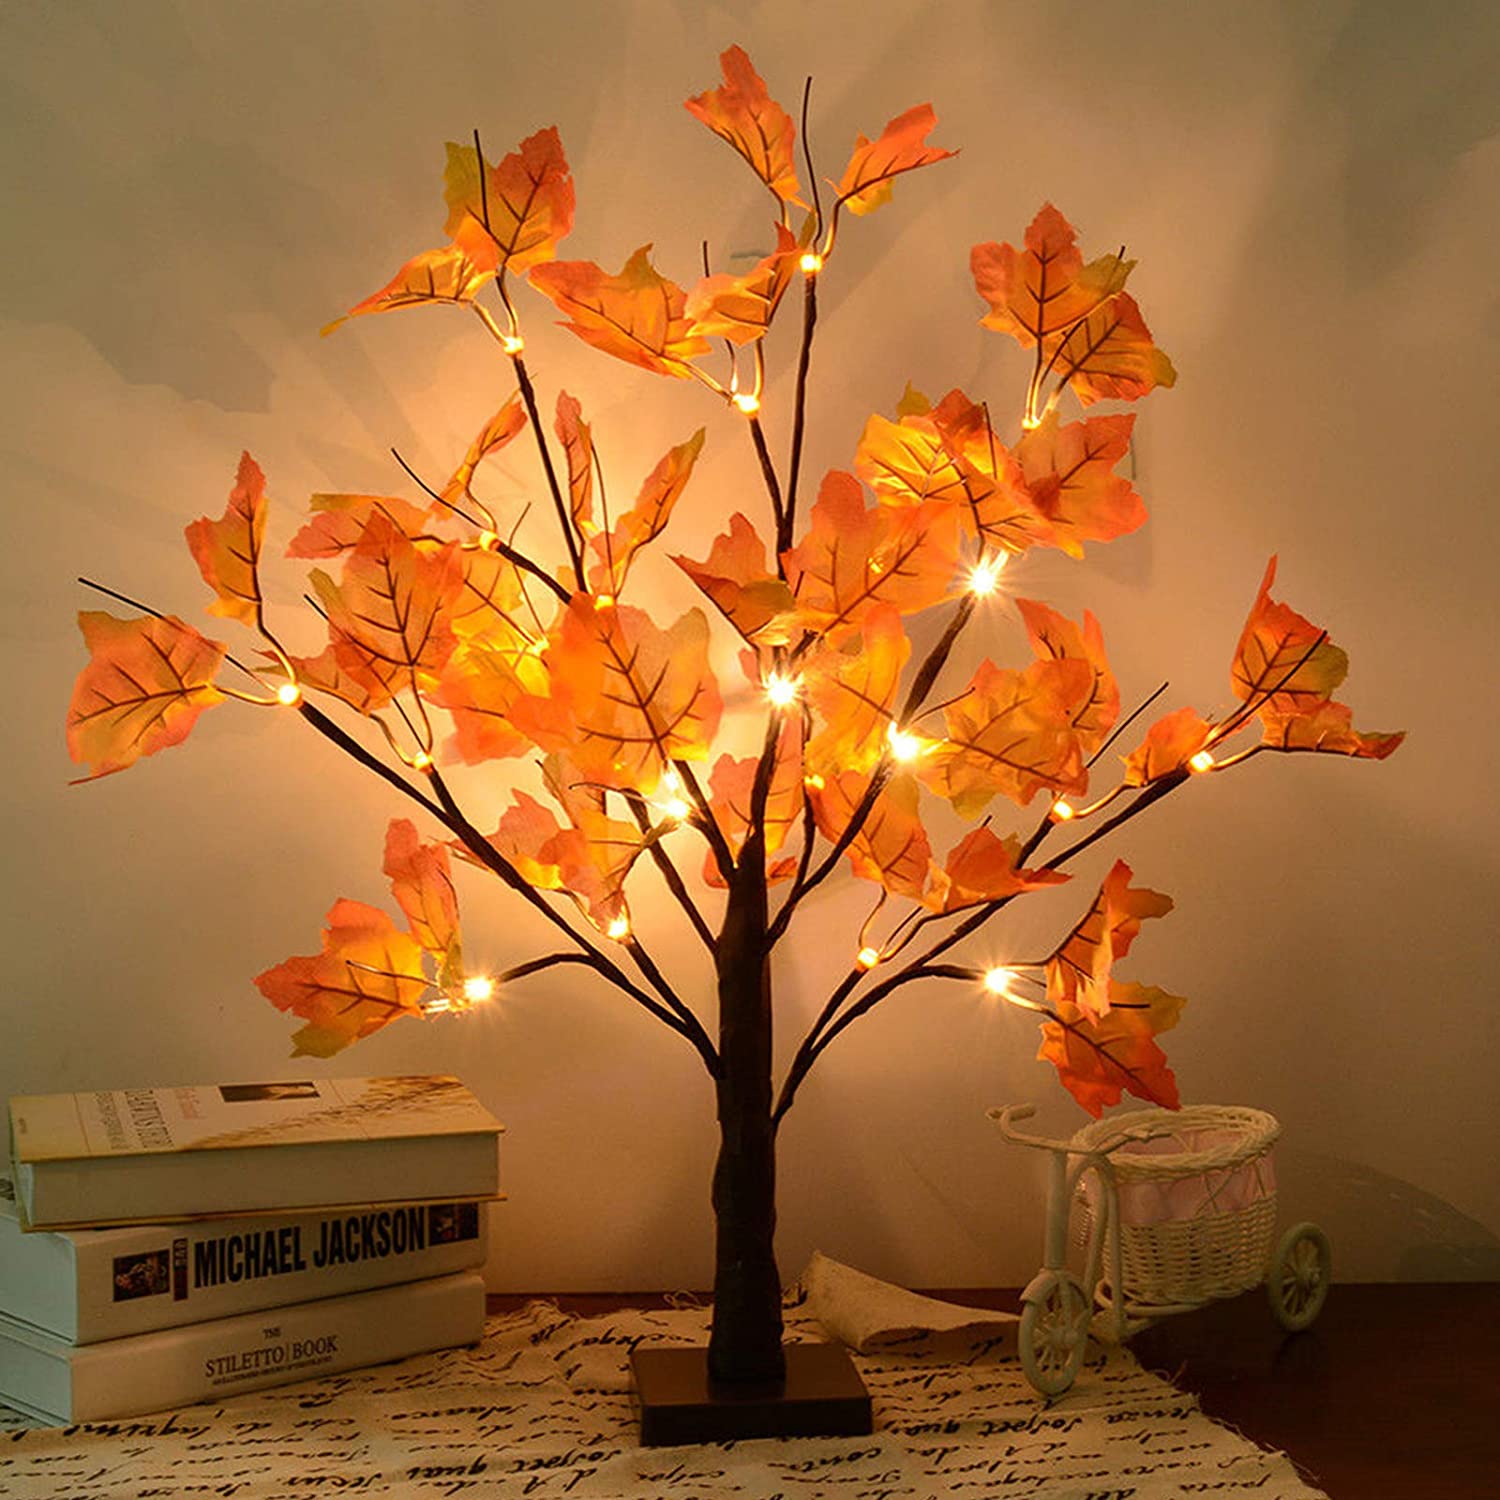 S-Union Artificial Fall Lighted Maple Tree 24 LED Thanksgiving Christmas Decorations Table Lights Battery Operated for Christmas Wedding Party Gifts Indoor Outdoor Harvest Home Decor